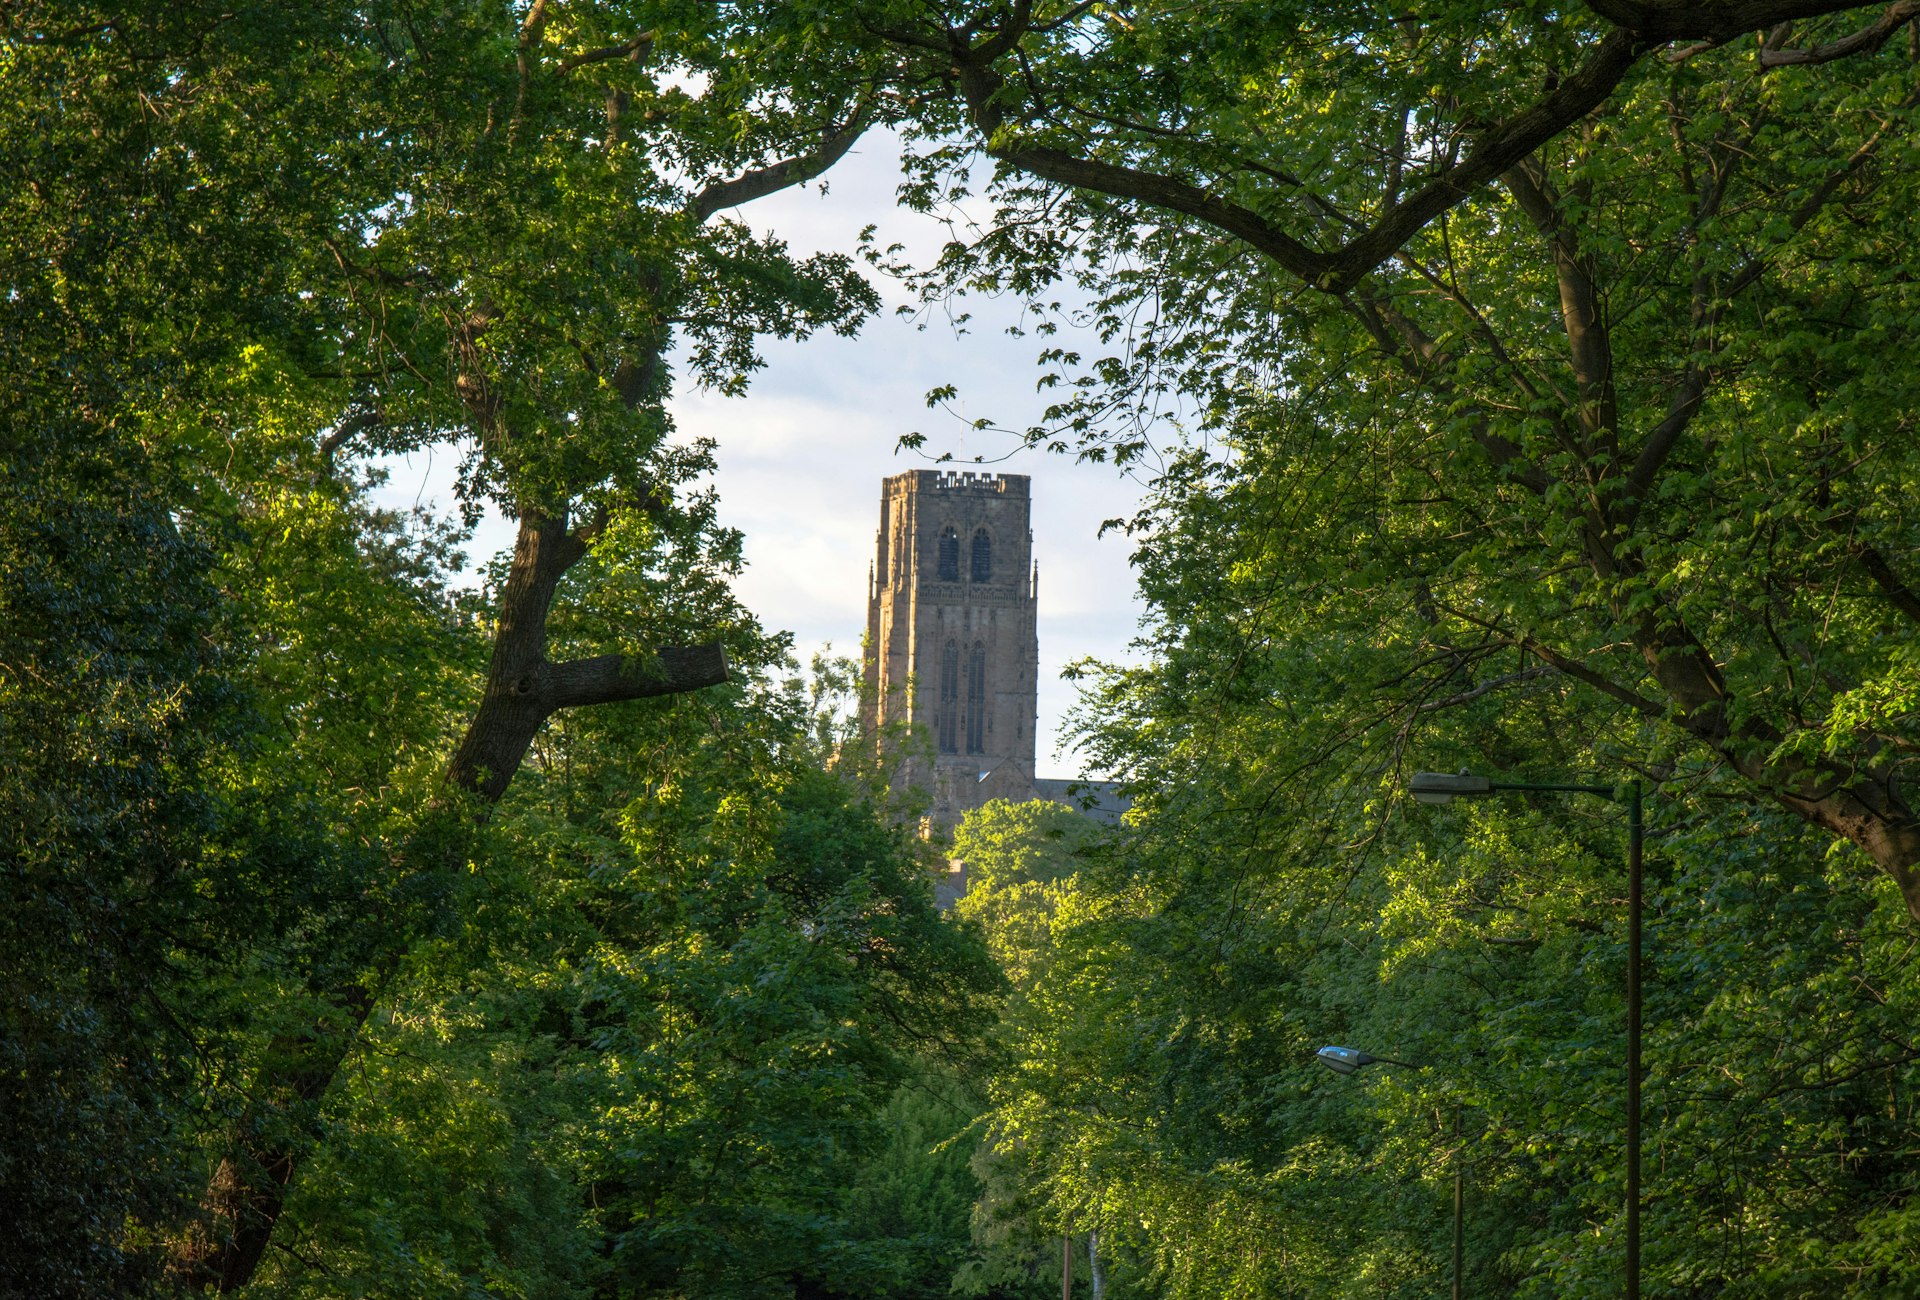 Durham Cathedral Tower seen through a gap in the trees, Durham, Northeast England, United Kingdom